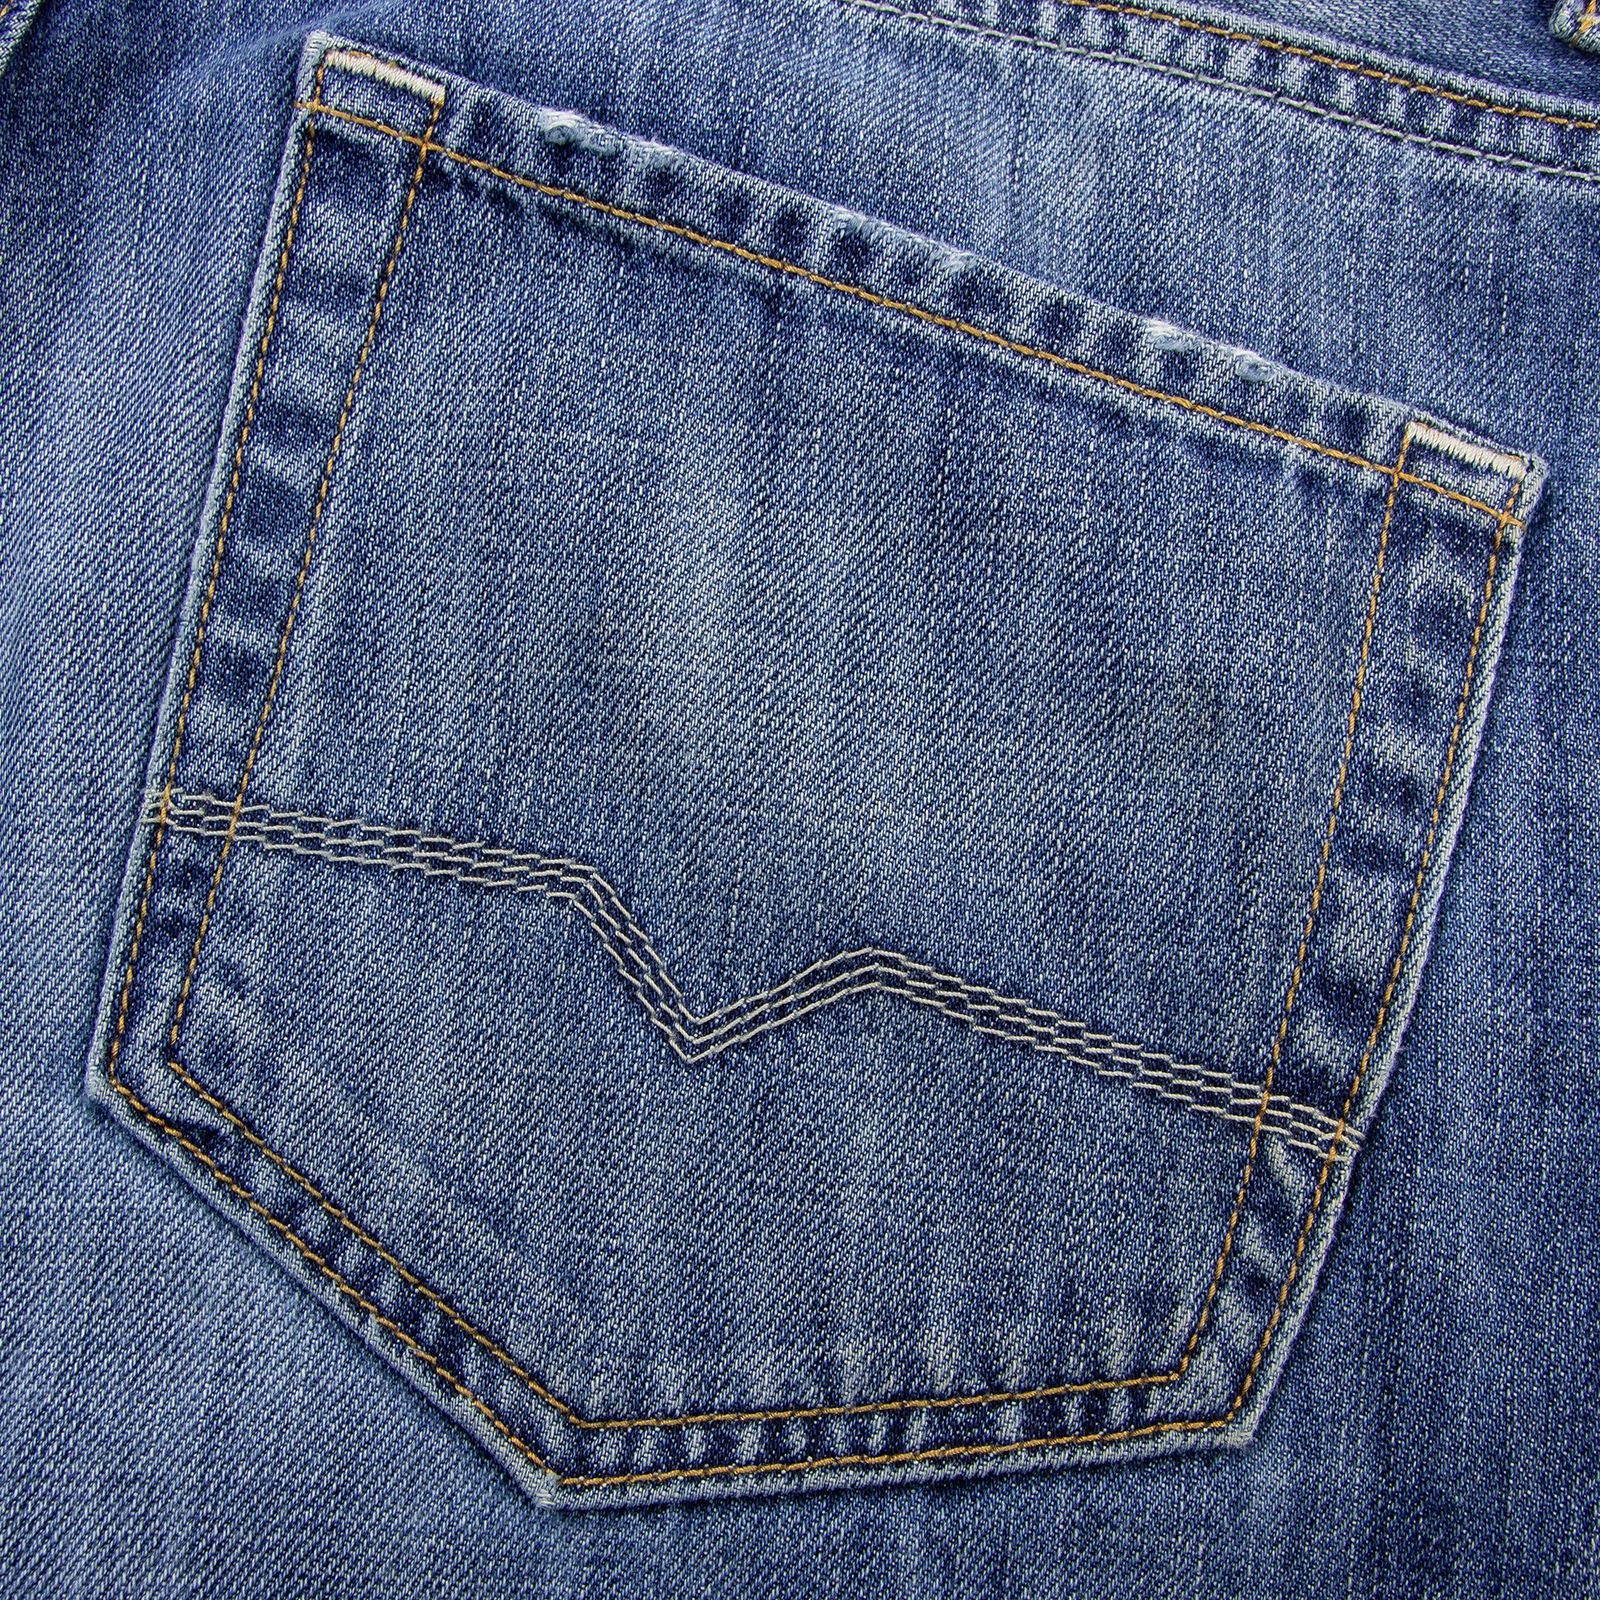 Hugo Boss Blue Denim Washed Leather Jacron 5-Pkt Button Fly Jeans 36W ...